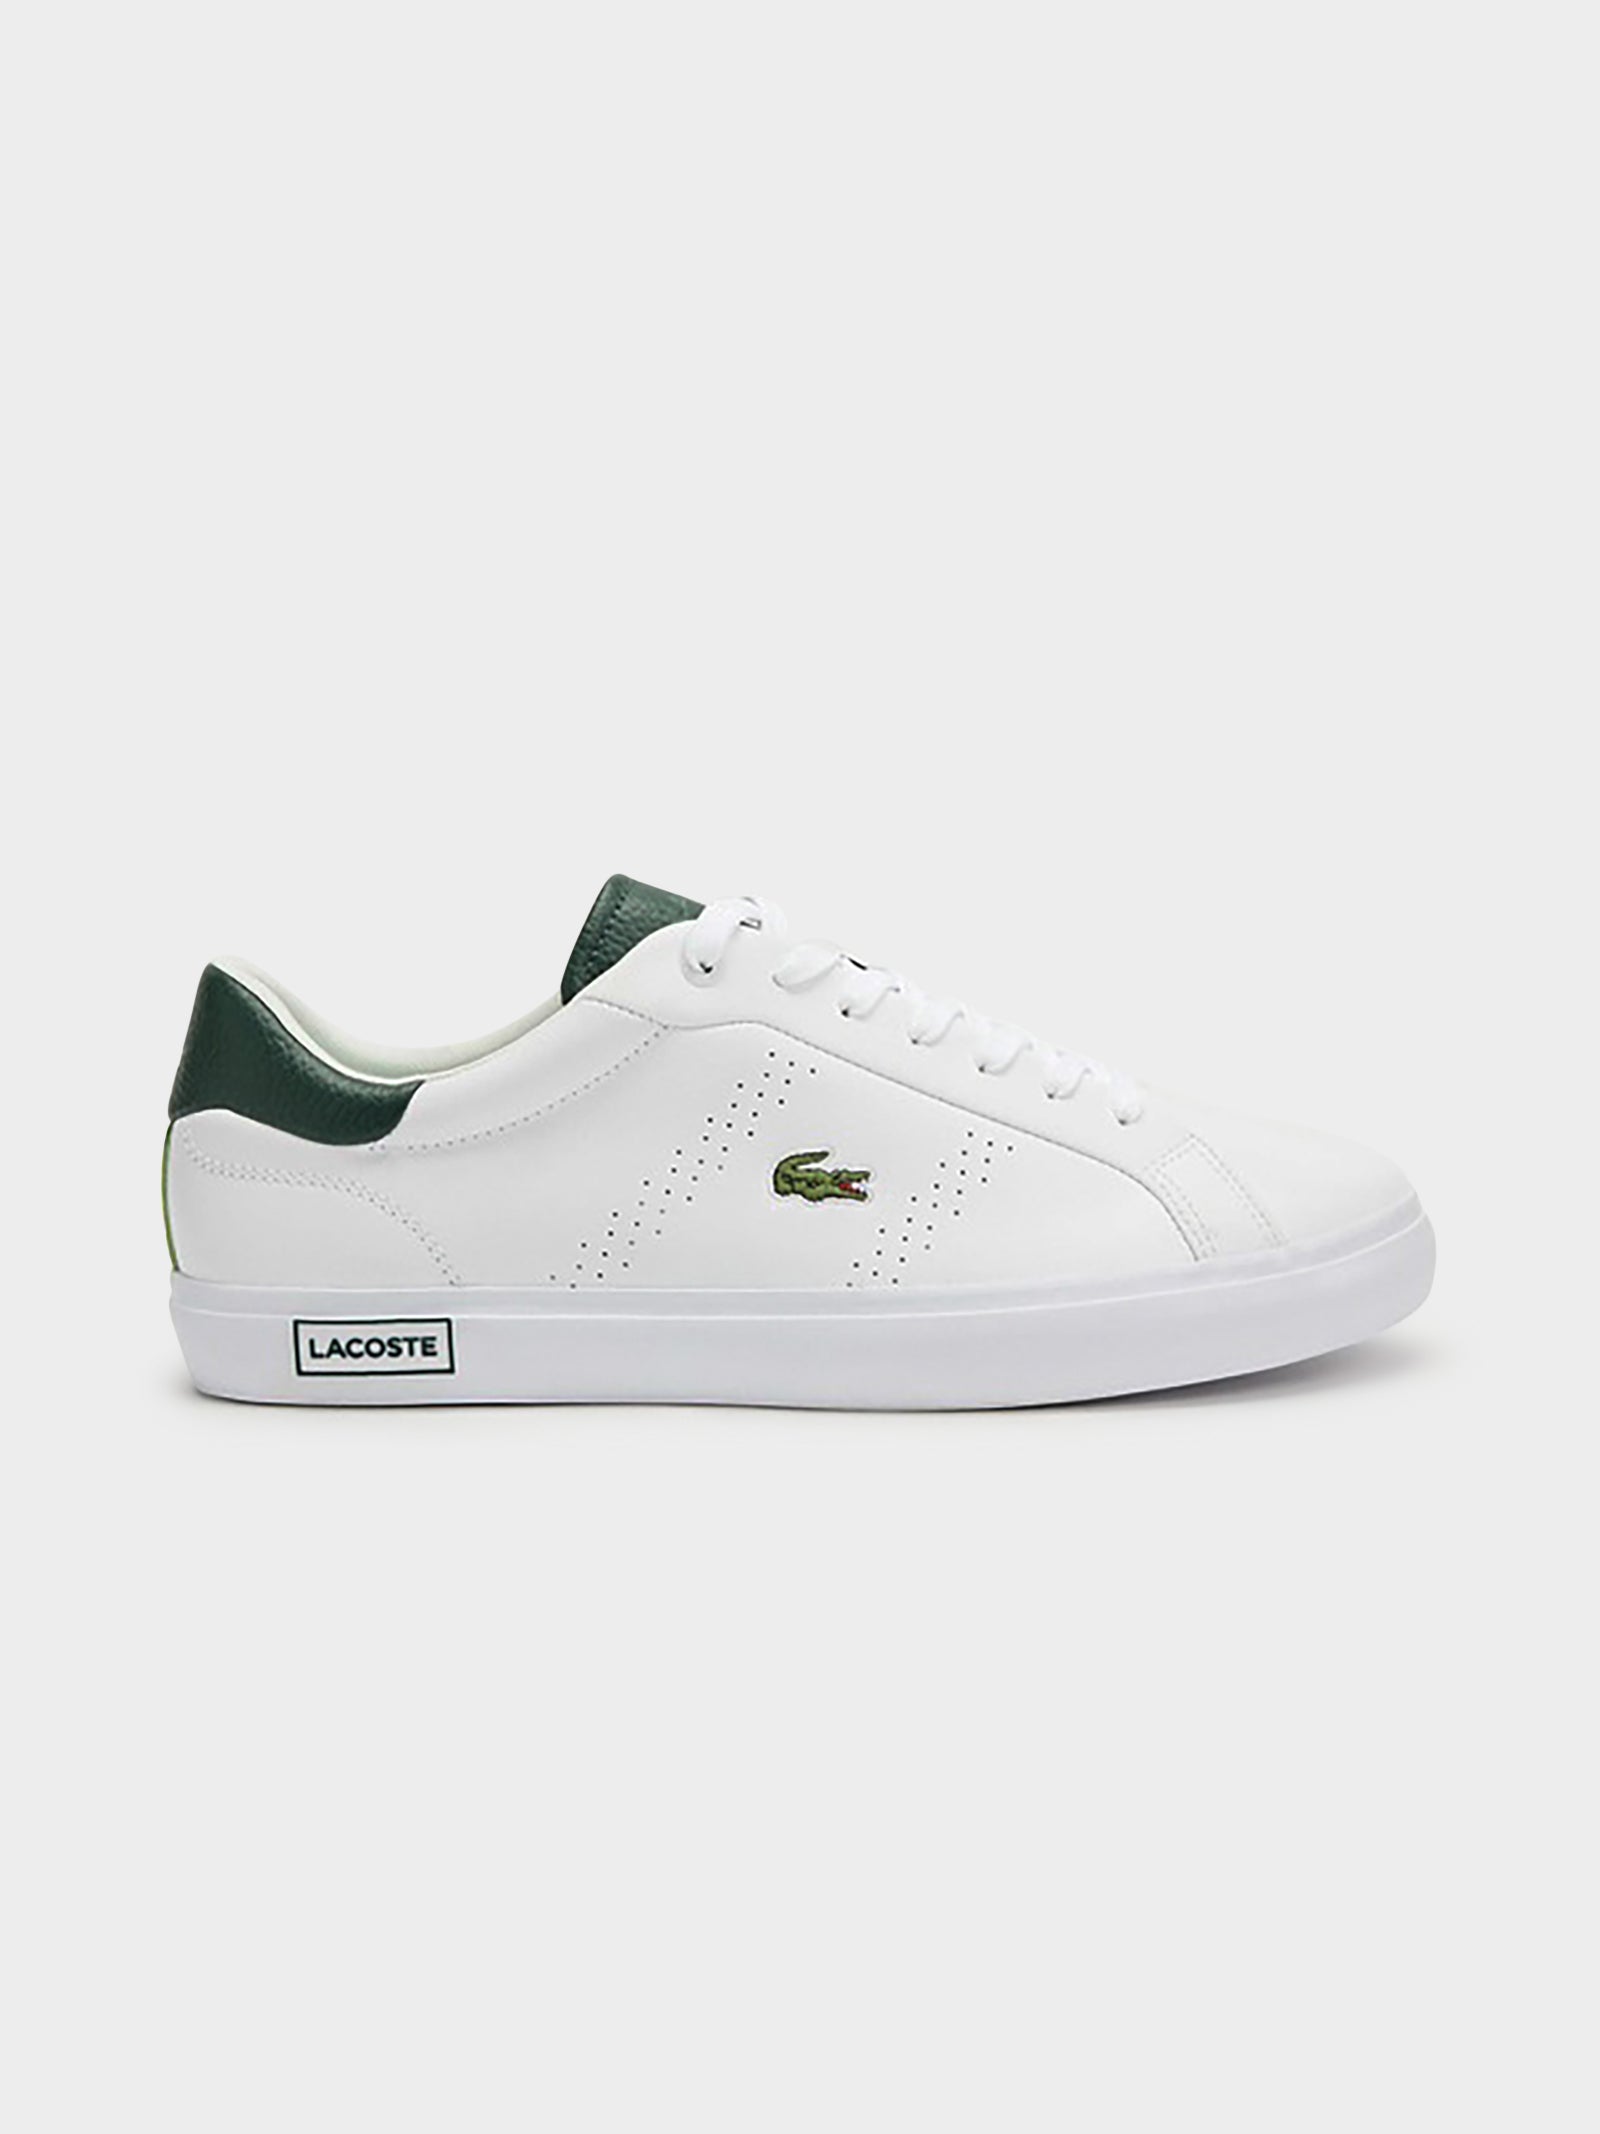 Lacoste Sneakers, Slides & Shoes Online | Fast & Free* Delivery Aus - Glue